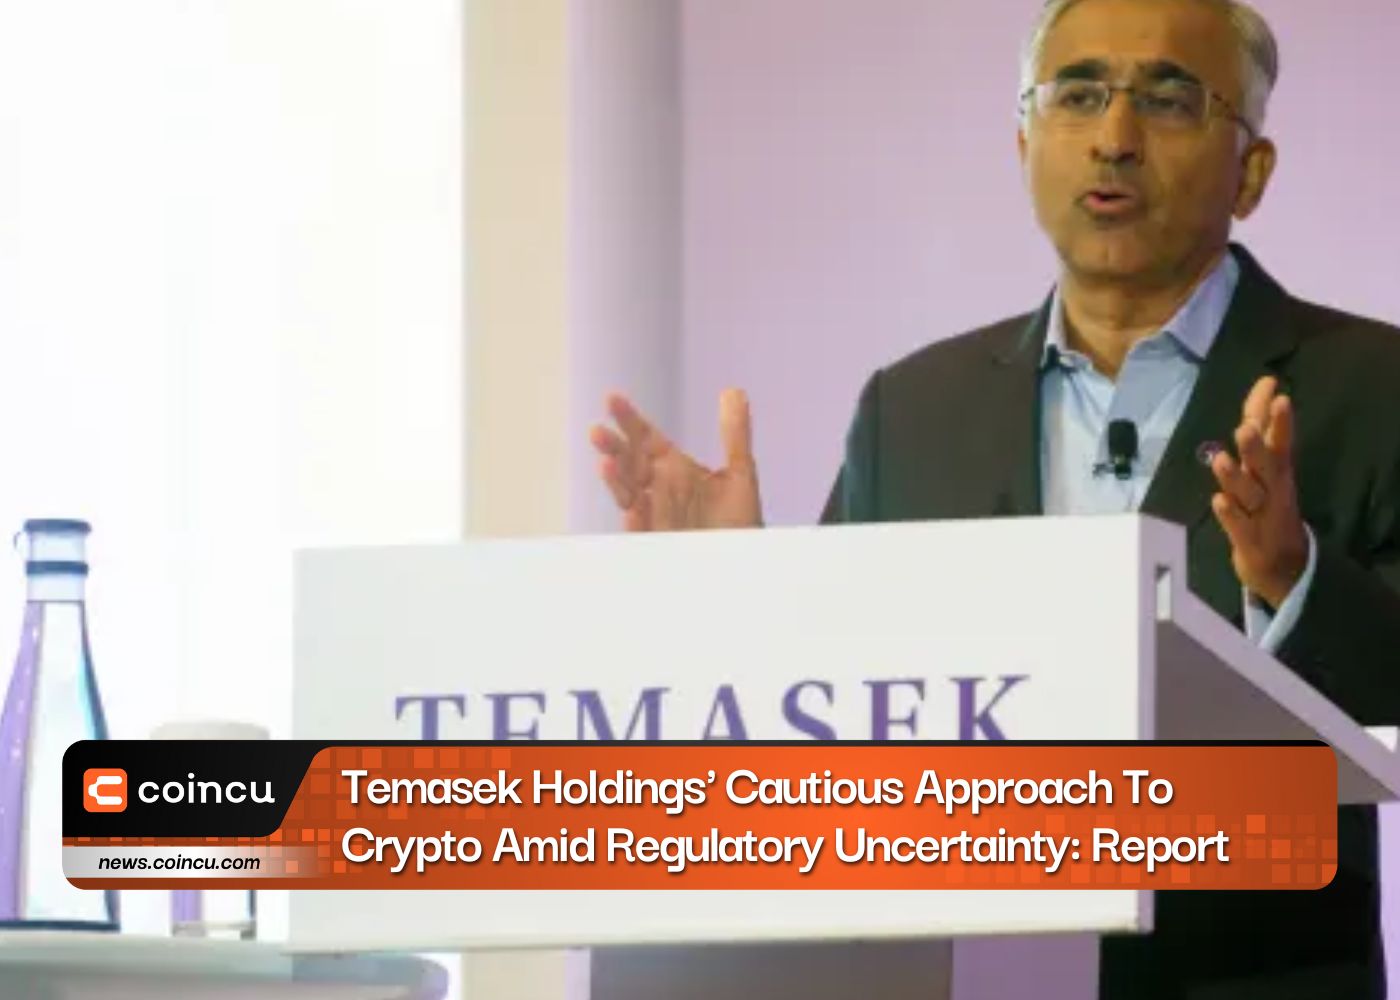 Temasek Holdings' Cautious Approach To Crypto Amid Regulatory Uncertainty: Report